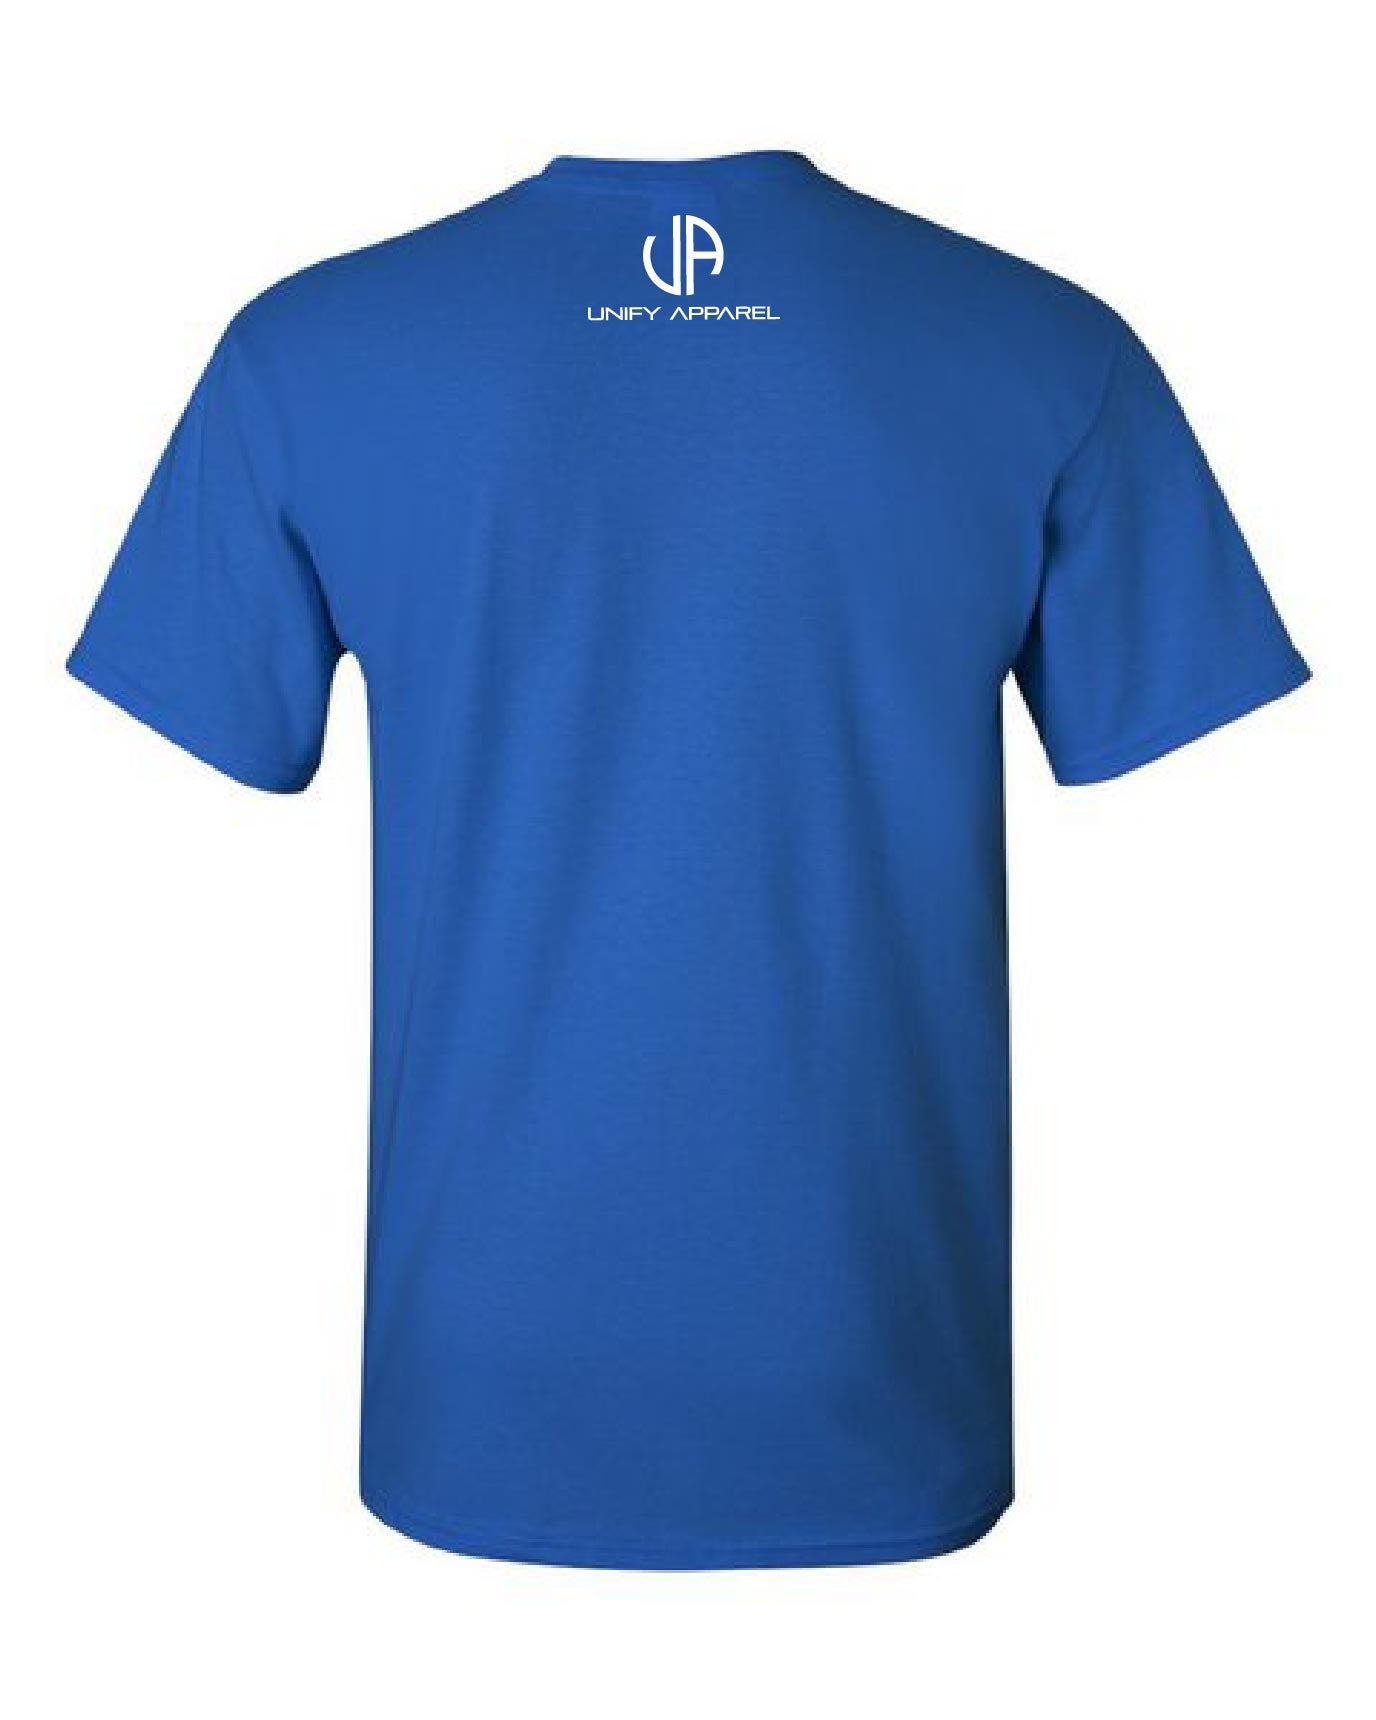 Royal Blue Connected Unify T-Shirt